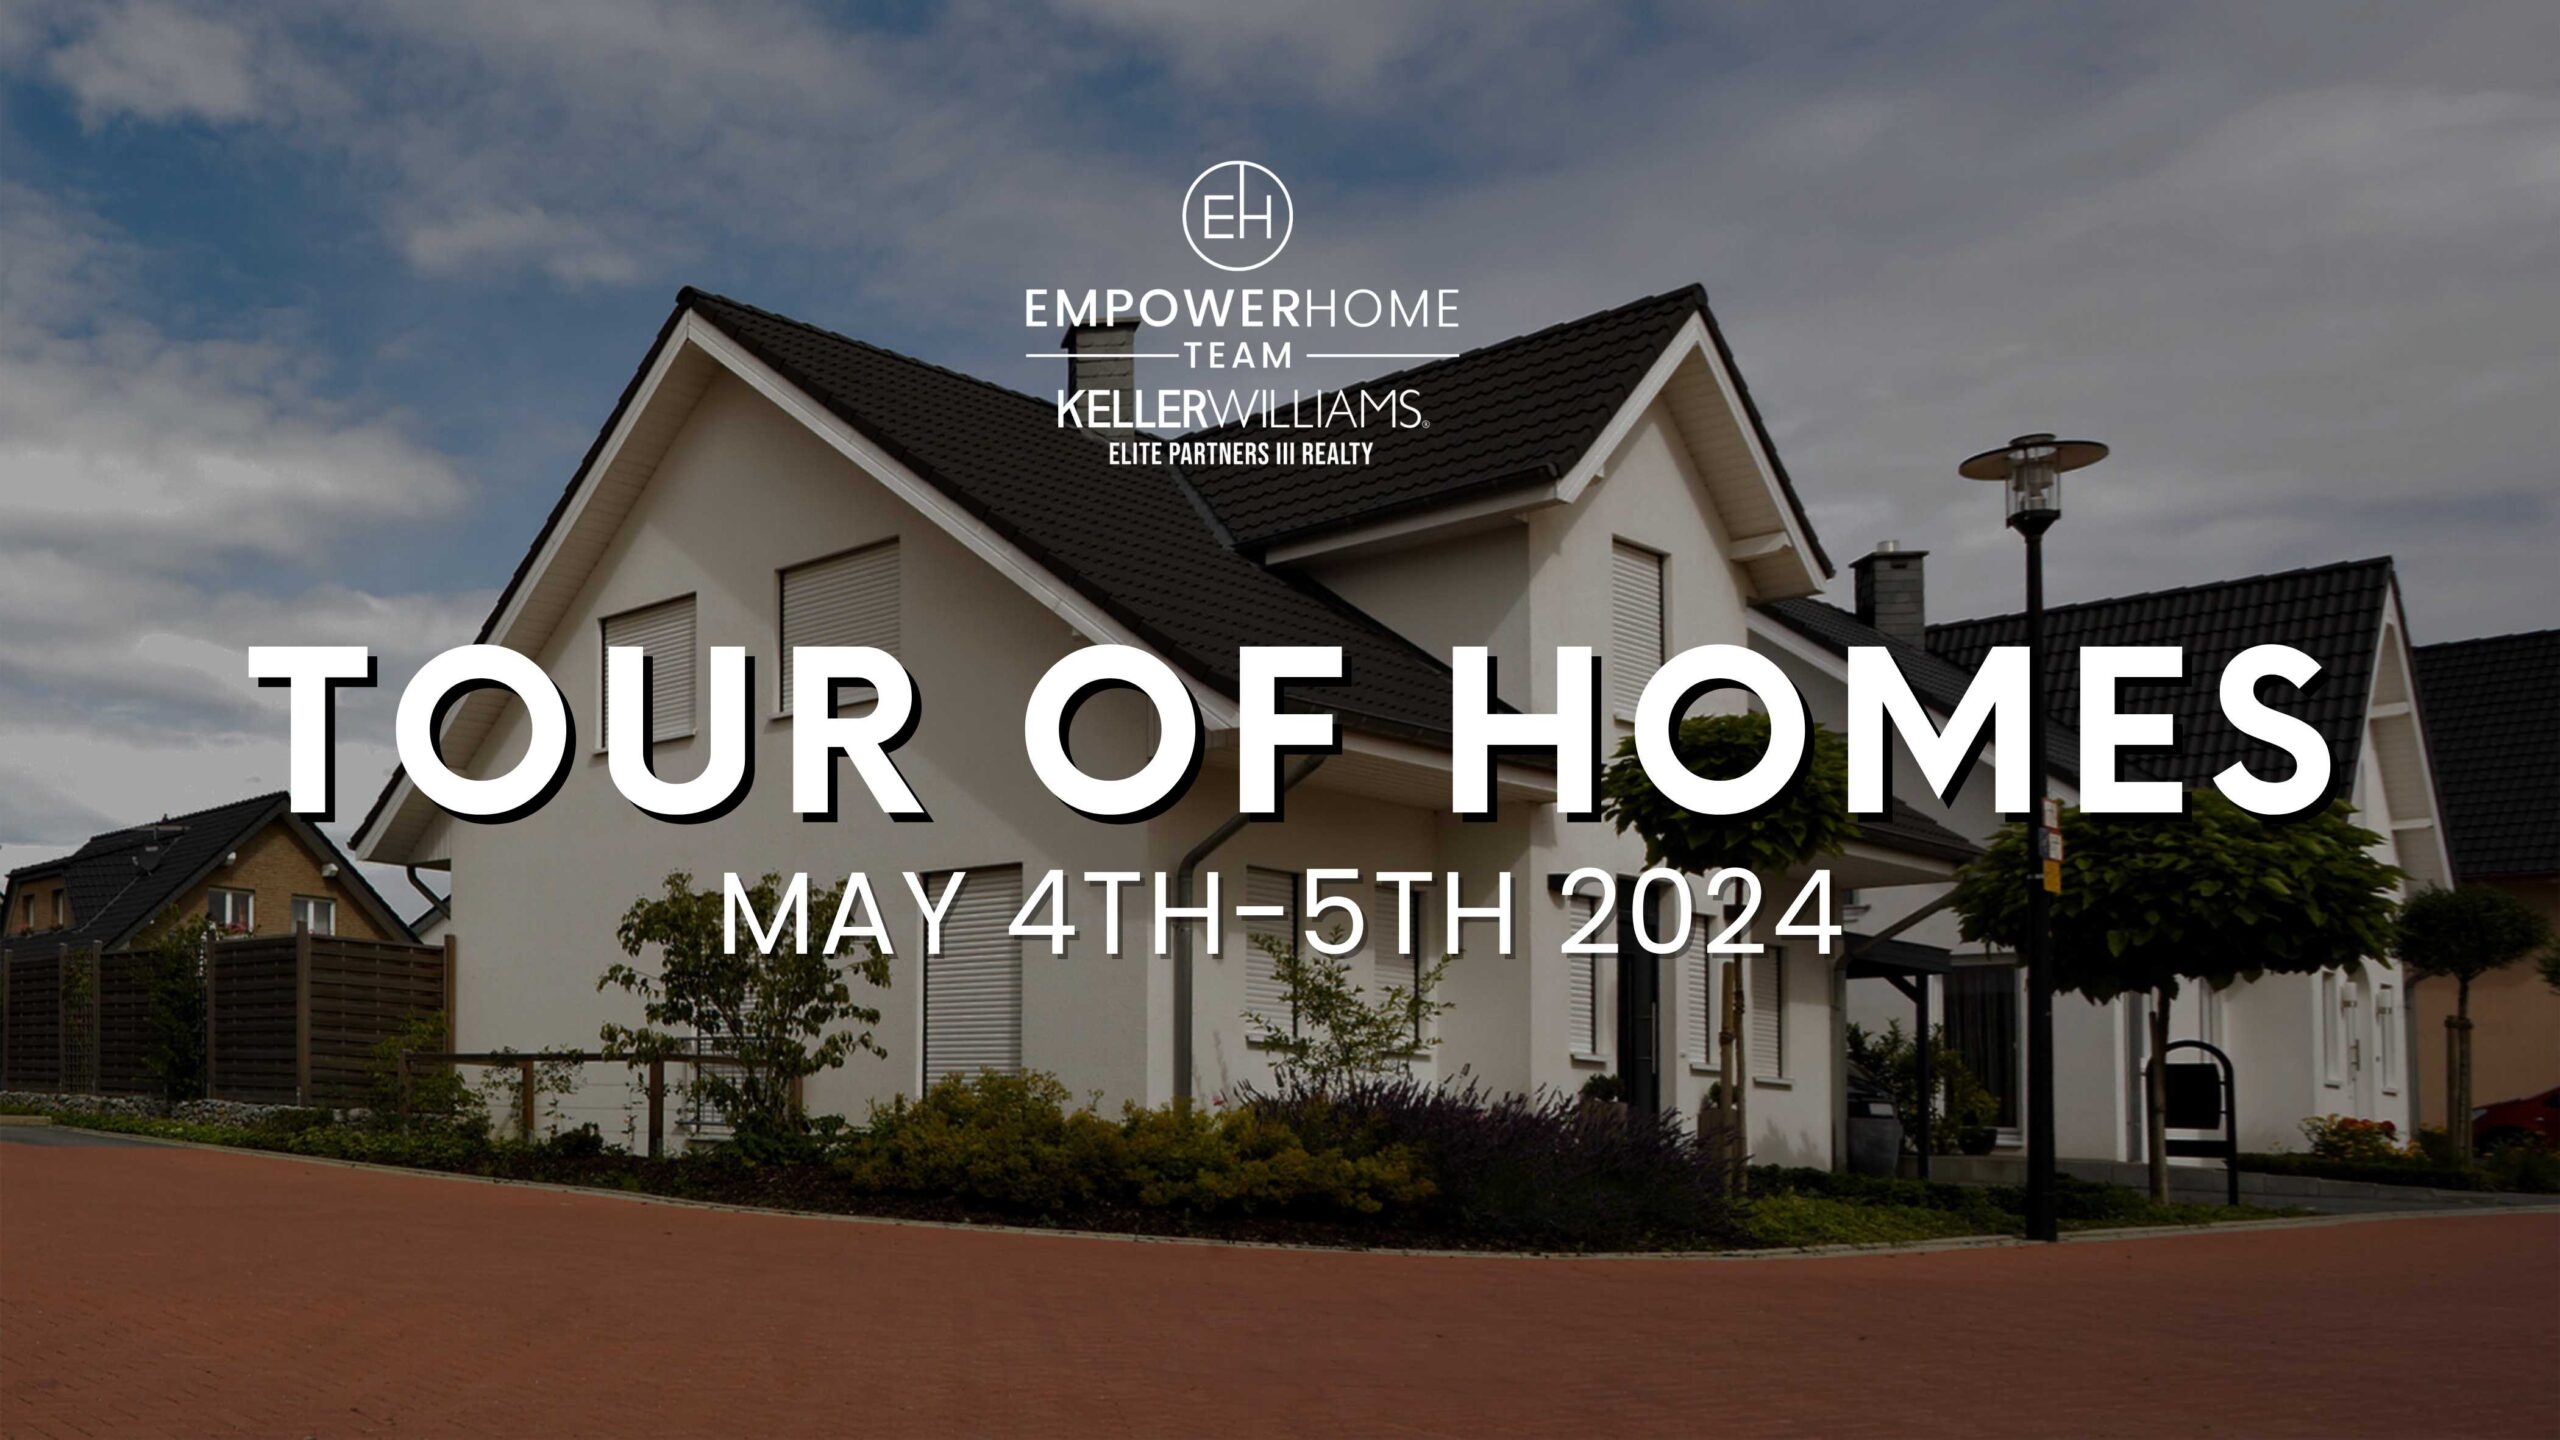 Orlando Tour of Homes In-Person May 4-5